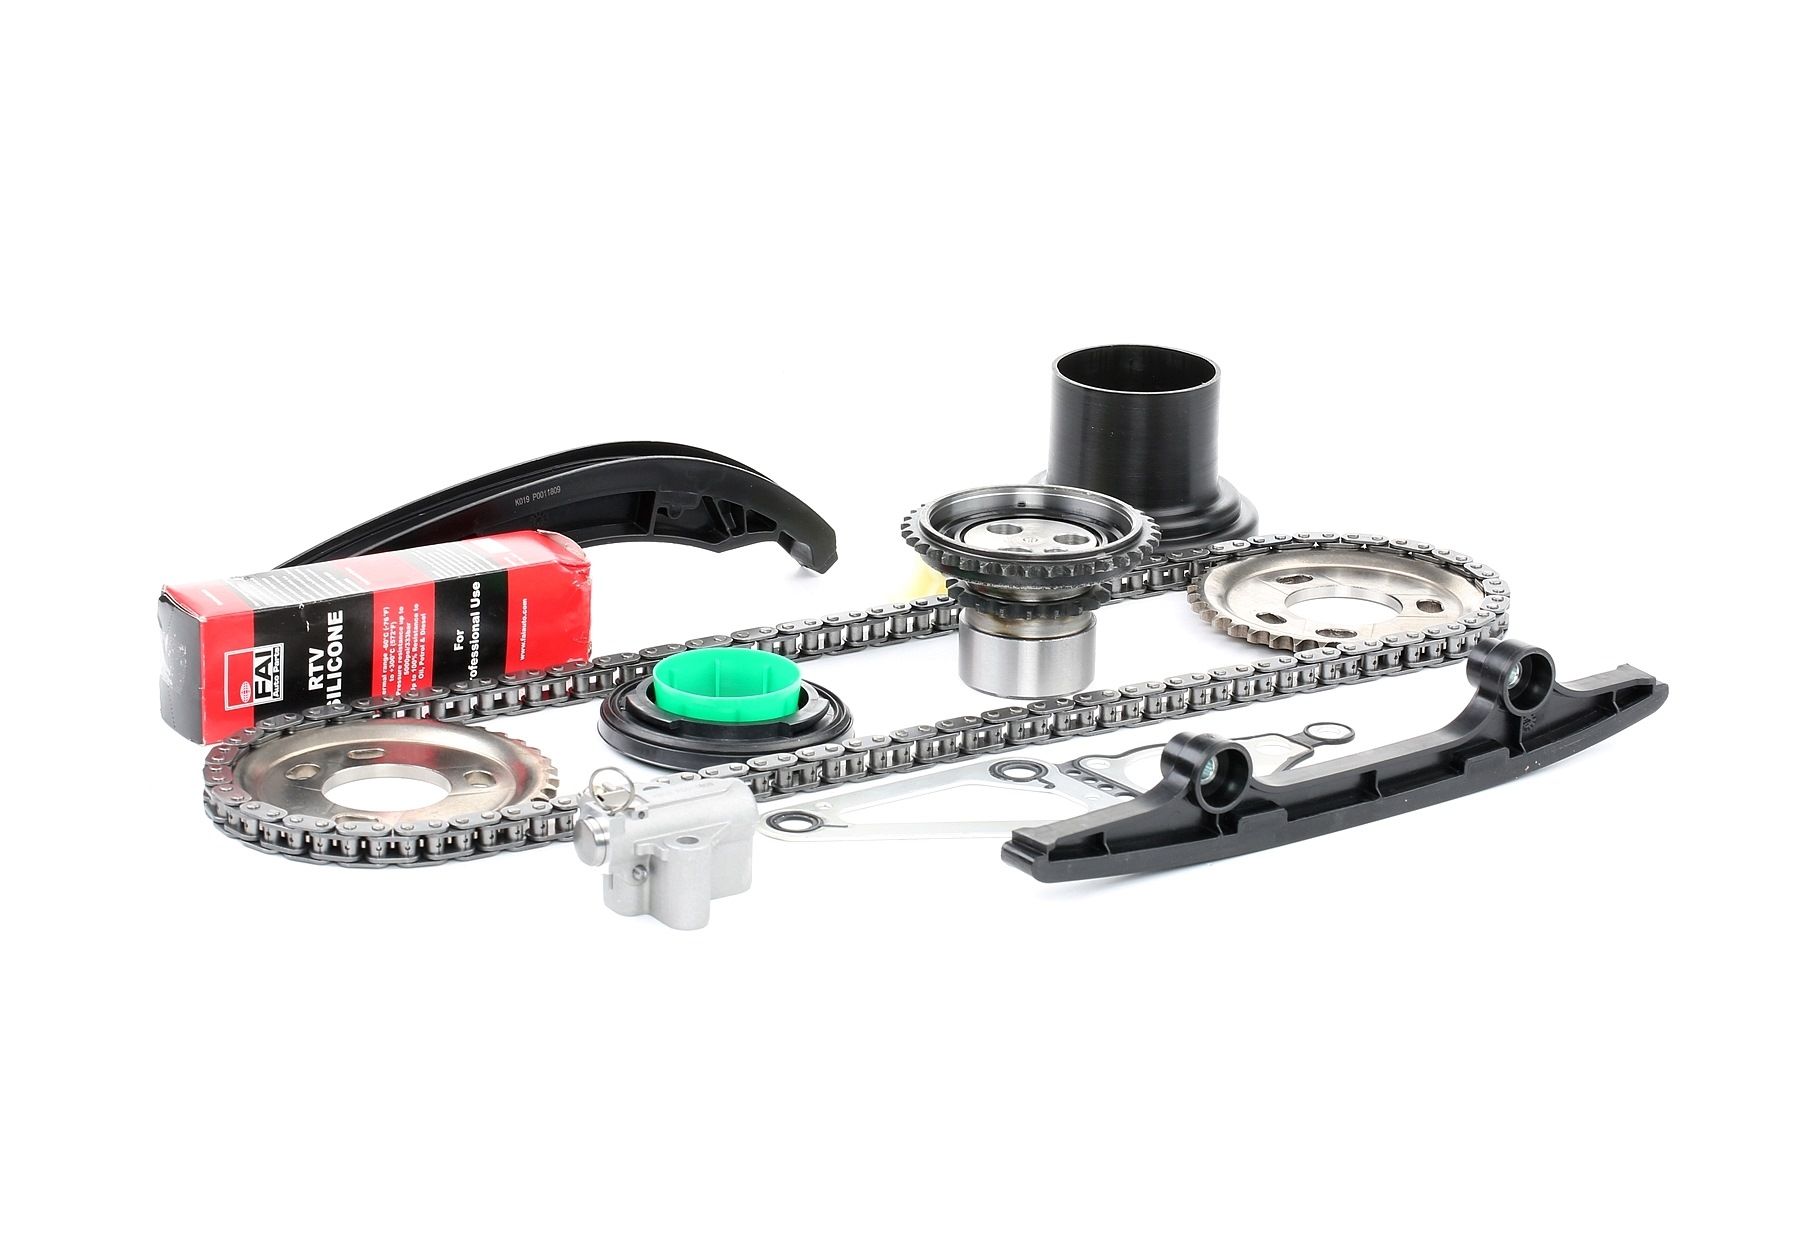 FAI AutoParts TCK130 Timing chain kit with gears, with gaskets/seals, Simplex, Bolt Chain